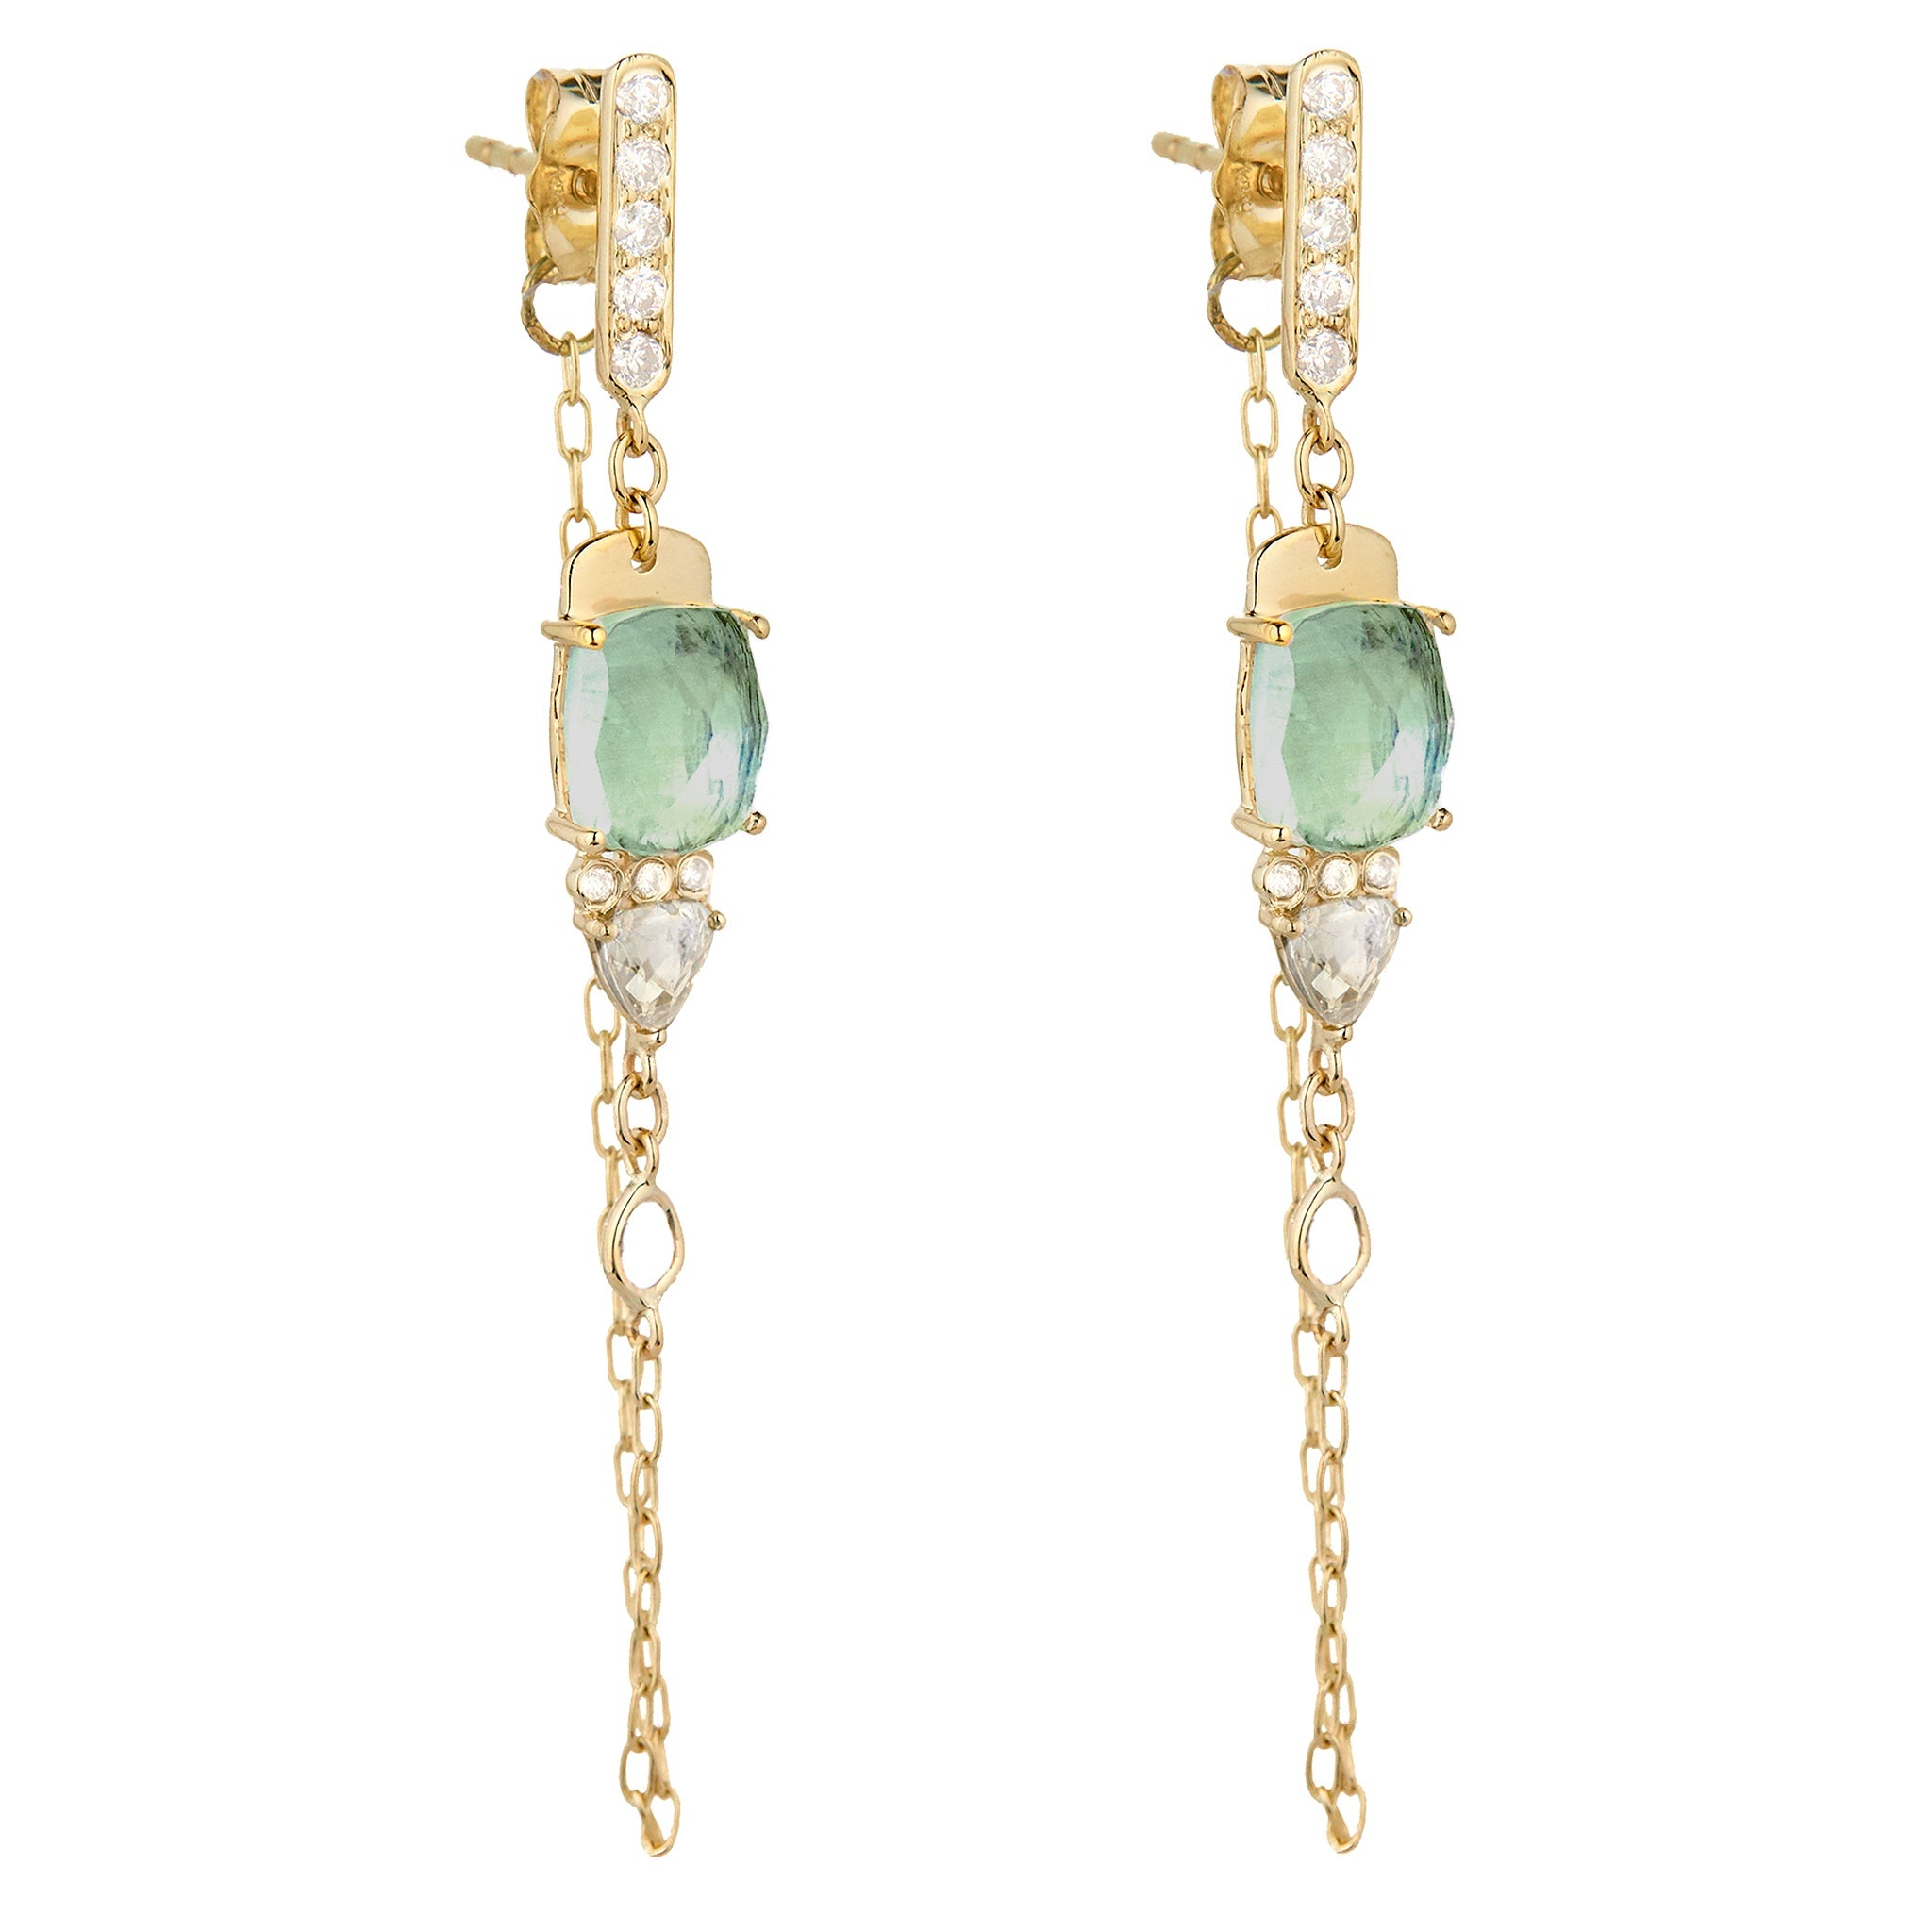 14K Gold Front-to-Back Chain Earrings with Rosecut Green Tourmalines - Peridot Fine Jewelry - Celine Daoust